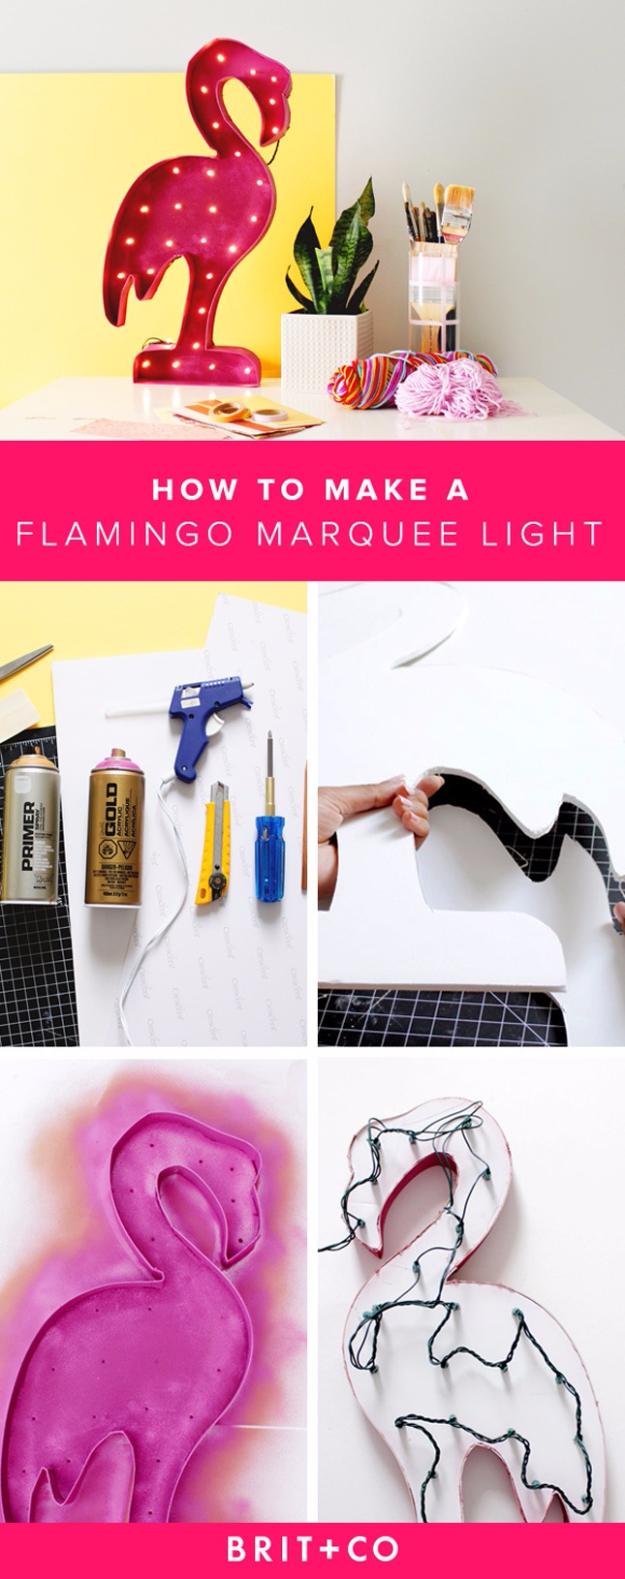 DIY Lighting Ideas for Teen and Kids Rooms - Flamingo Marquee Light - Fun DIY Lights like Lamps, Pendants, Chandeliers and Hanging Fixtures for the Bedroom plus cool ideas With String Lights. Perfect for Girls and Boys Rooms, Teenagers and Dorm Room Decor 